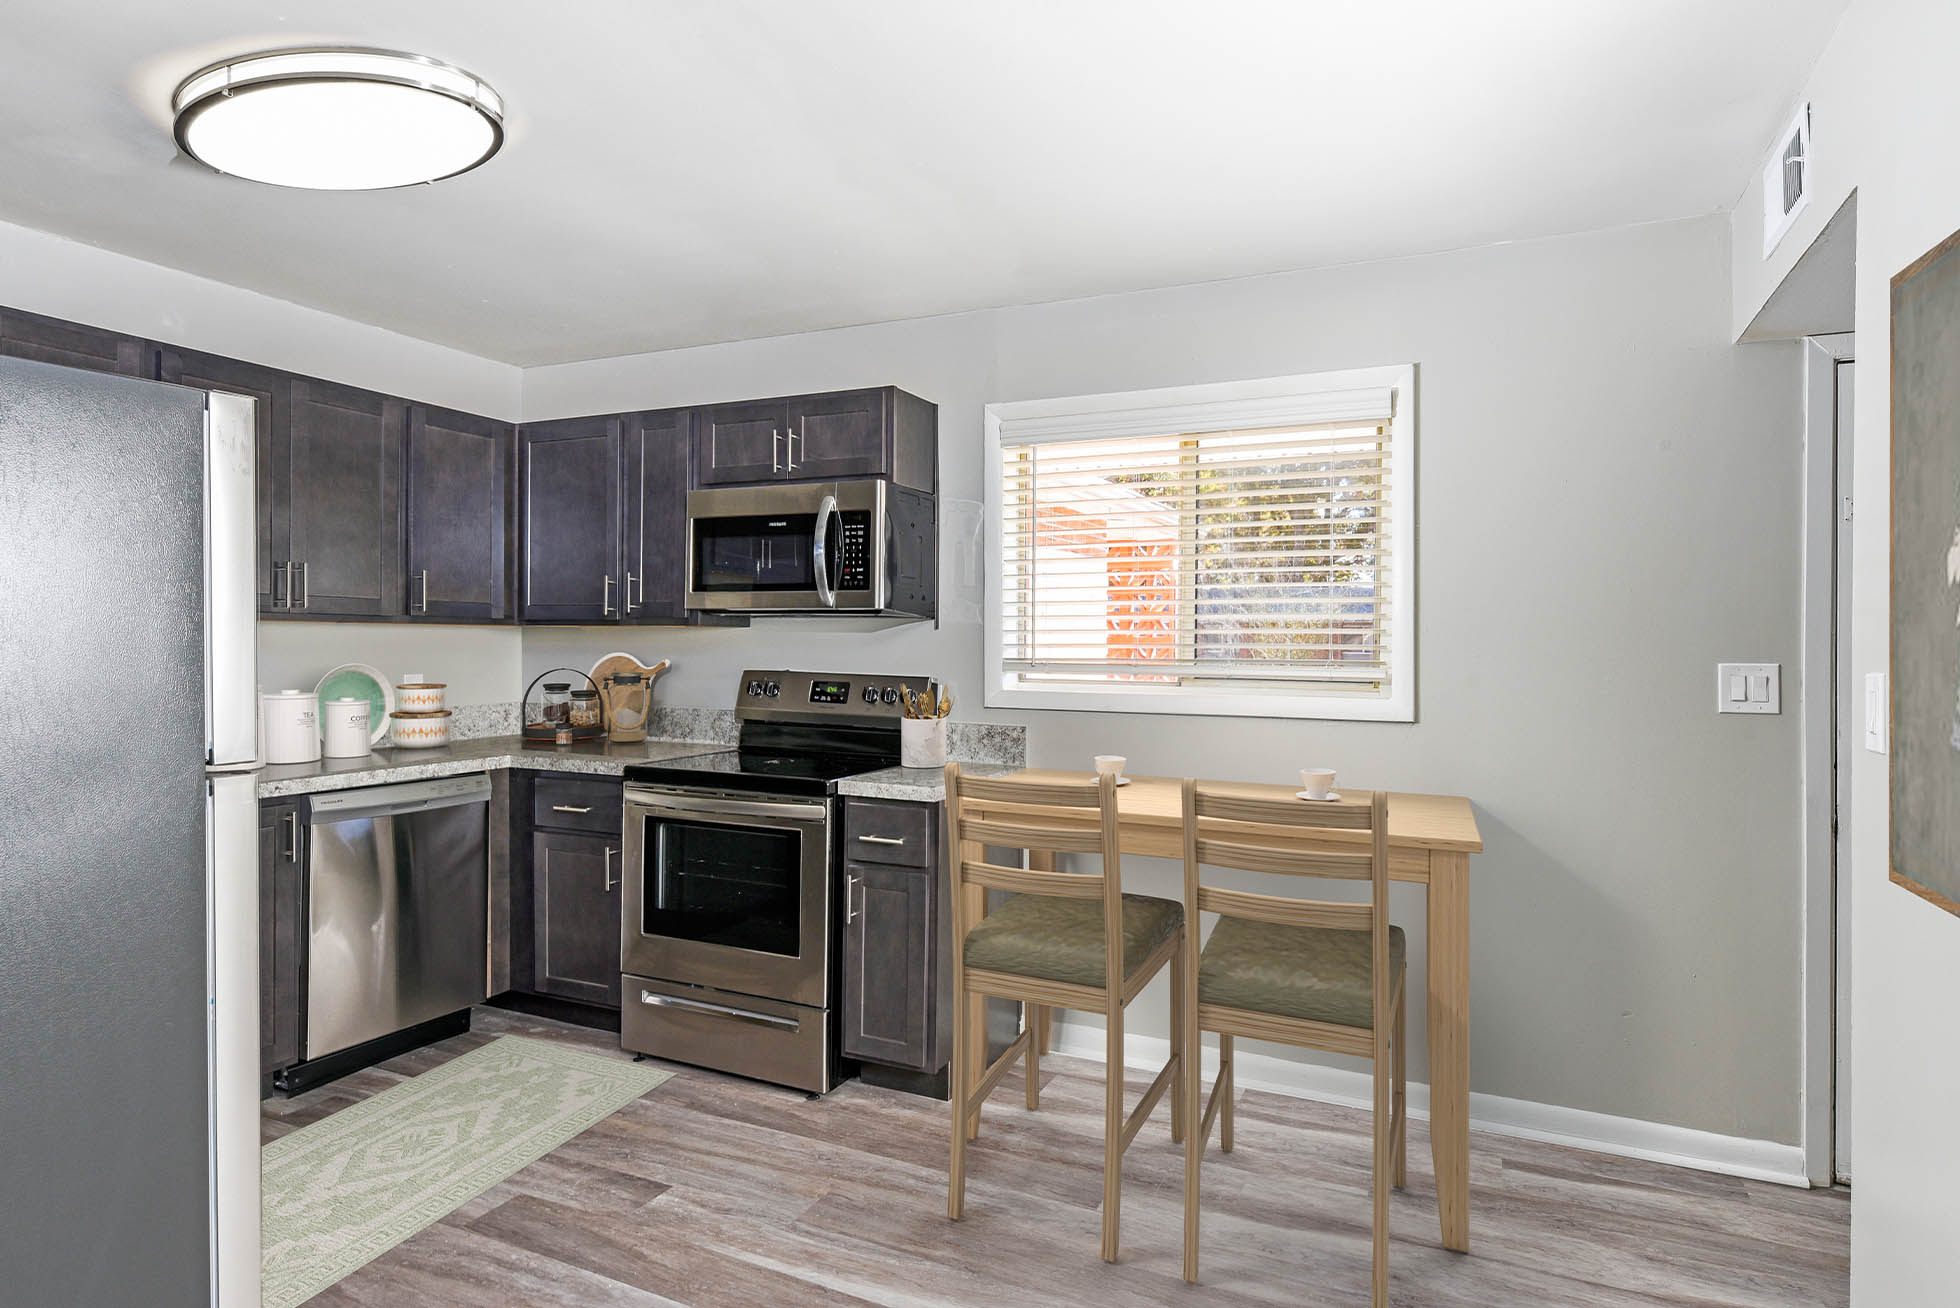 Model kitchen with dining room at Harborstone, Newport News, Virginia